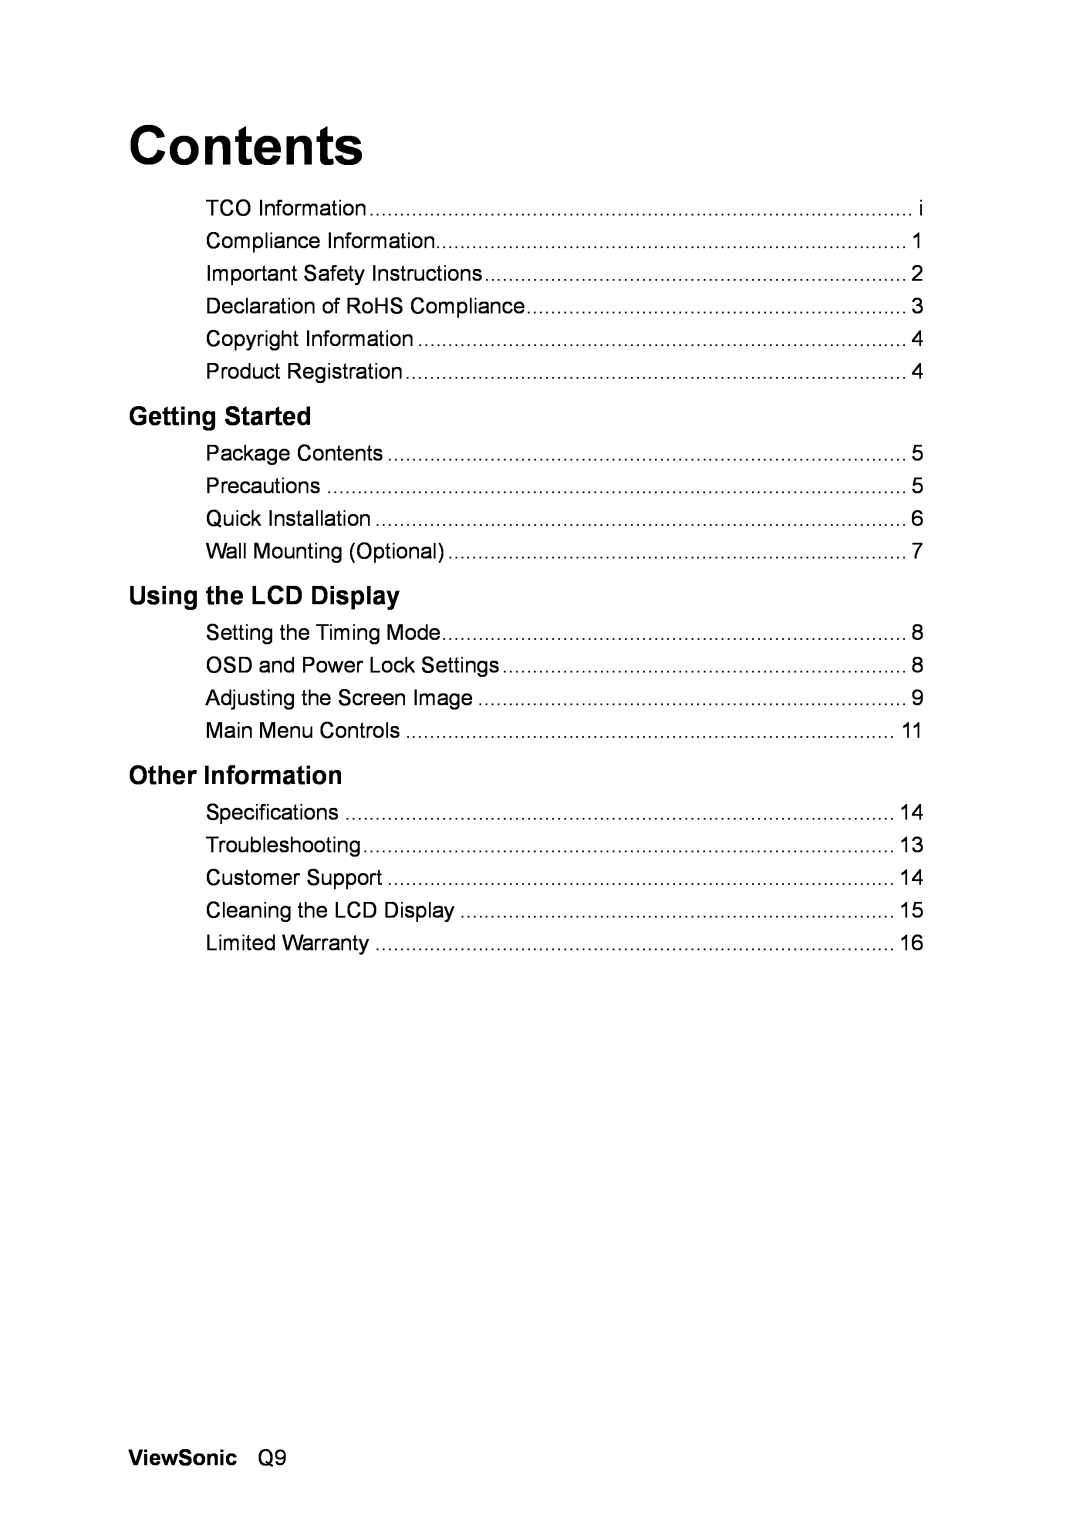 ViewSonic Q9B manual Contents, ViewSonic Q9, Getting Started, Using the LCD Display, Other Information 